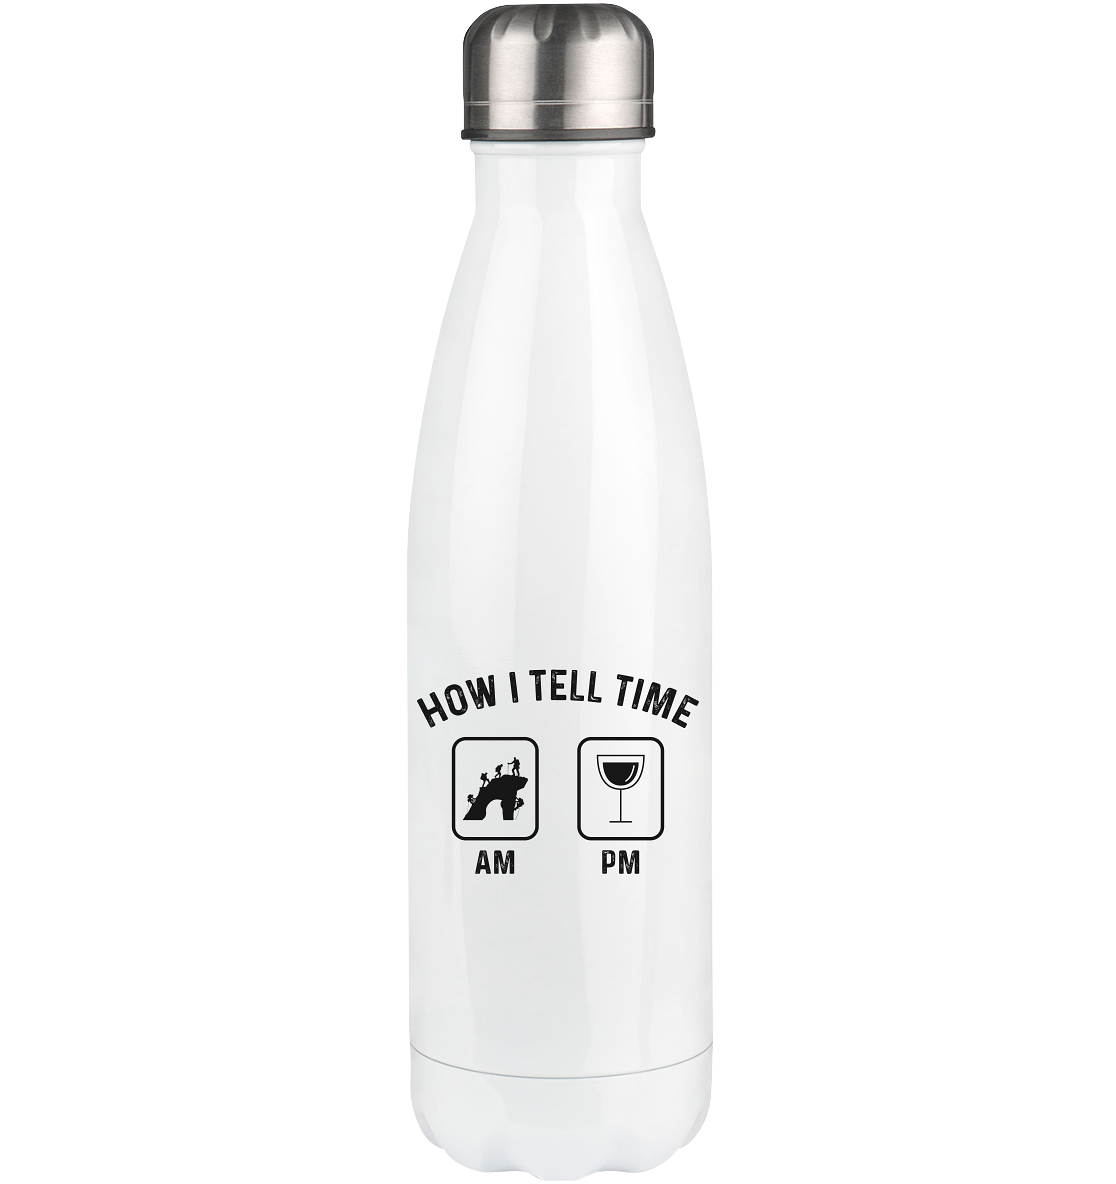 How I Tell Time Am Pm - Edelstahl Thermosflasche klettern 500ml